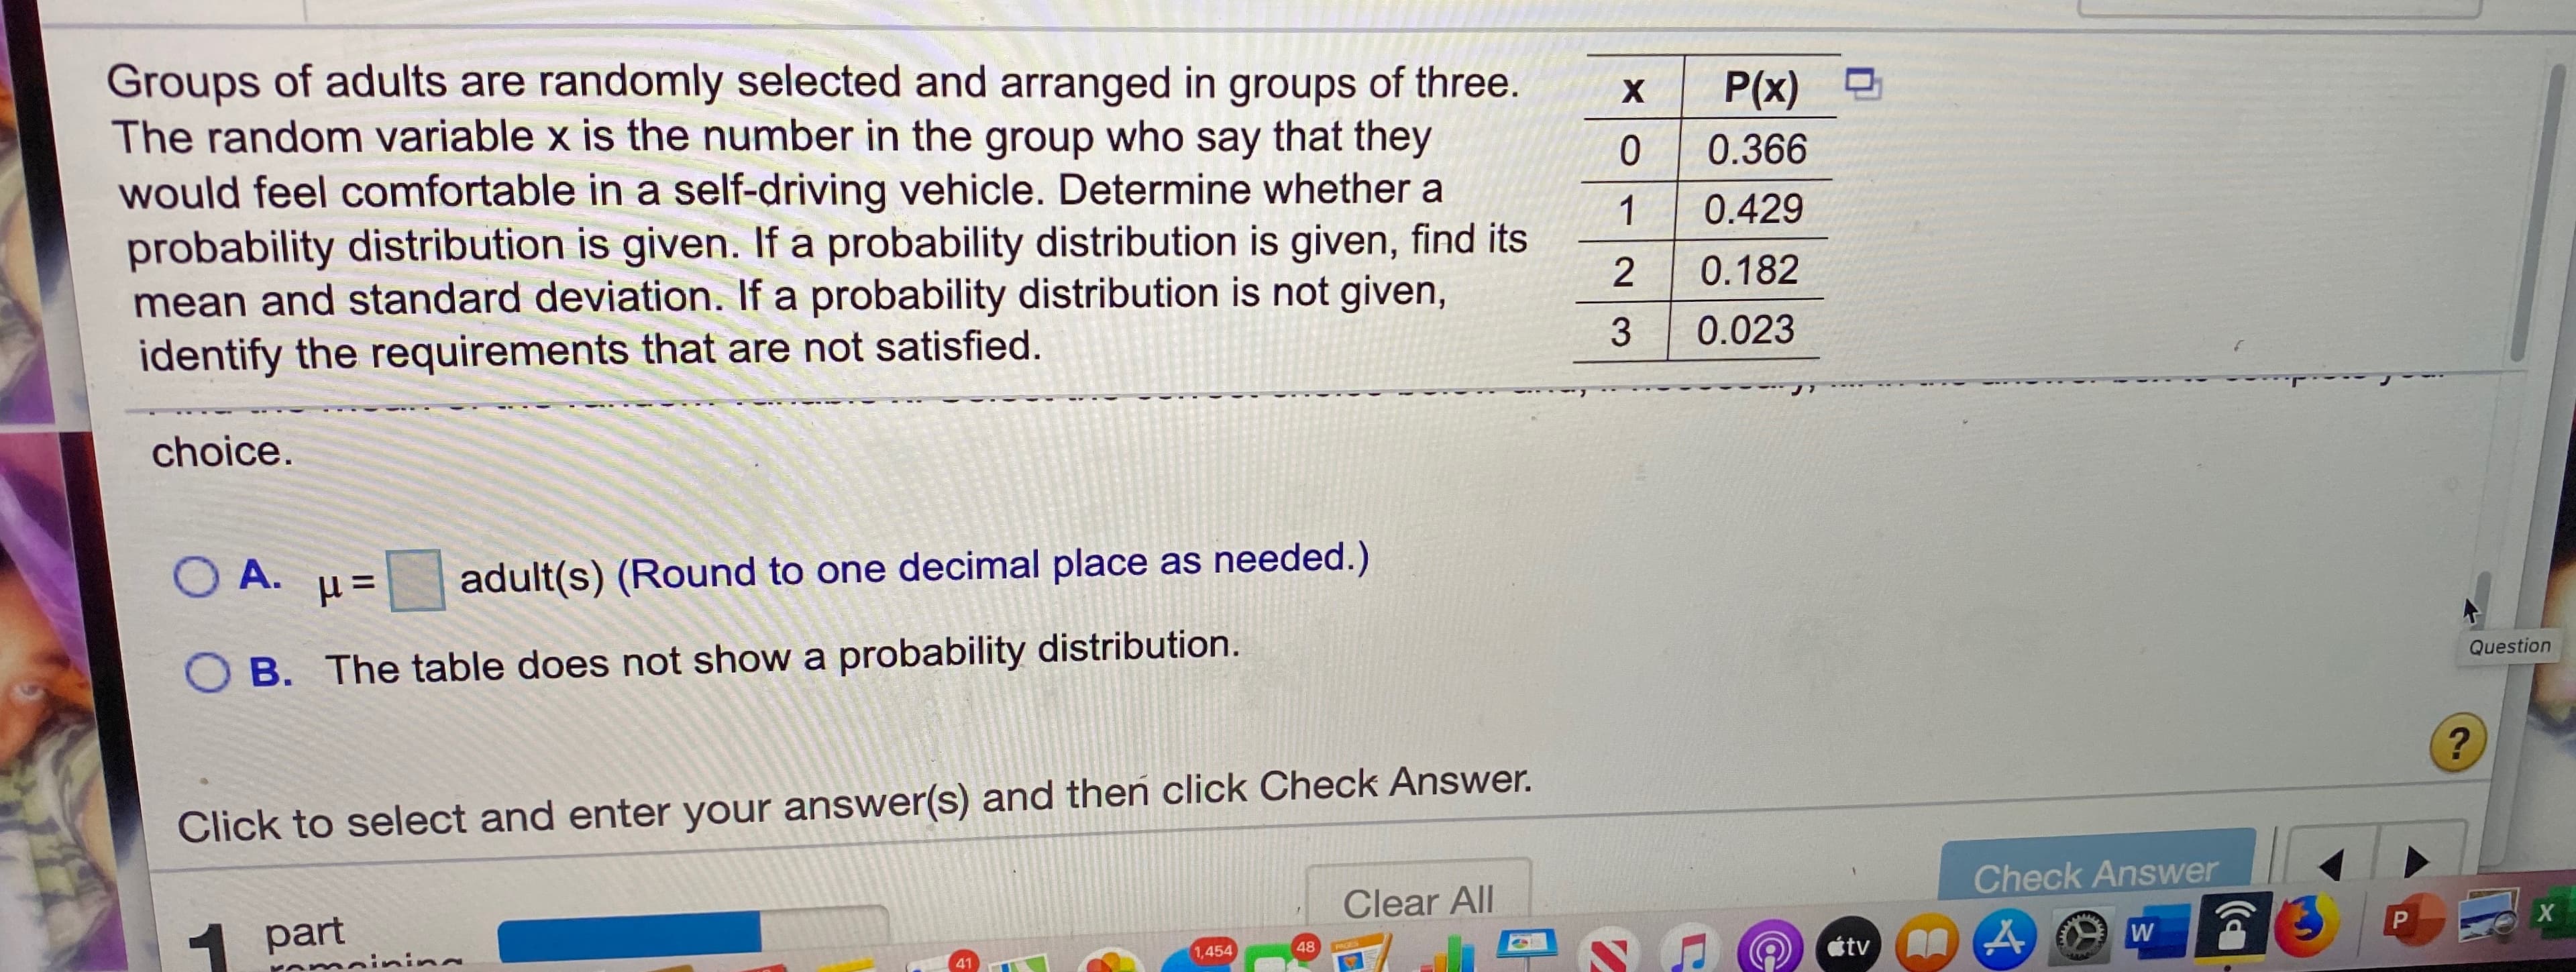 Groups of adults are randomly selected and arranged in groups of three.
The random variable x is the number in the group who say that they
would feel comfortable in a self-driving vehicle. Determine whether a
probability distribution is given. If a probability distribution is given, find its
mean and standard deviation. If a probability distribution is not given,
identify the requirements that are not satisfied.
X.
P(x)
0.366
1
0.429
0.182
3
0.023
choice.
O A.
adult(s) (Round to one decimal place as needed.)
B. The table does not show a probability distribution.
Question
Click to select and enter your answer(s) and then click Check Answer.
Check Answer
Clear All
part
omainin
1,454
48
PAGES
41
átv
